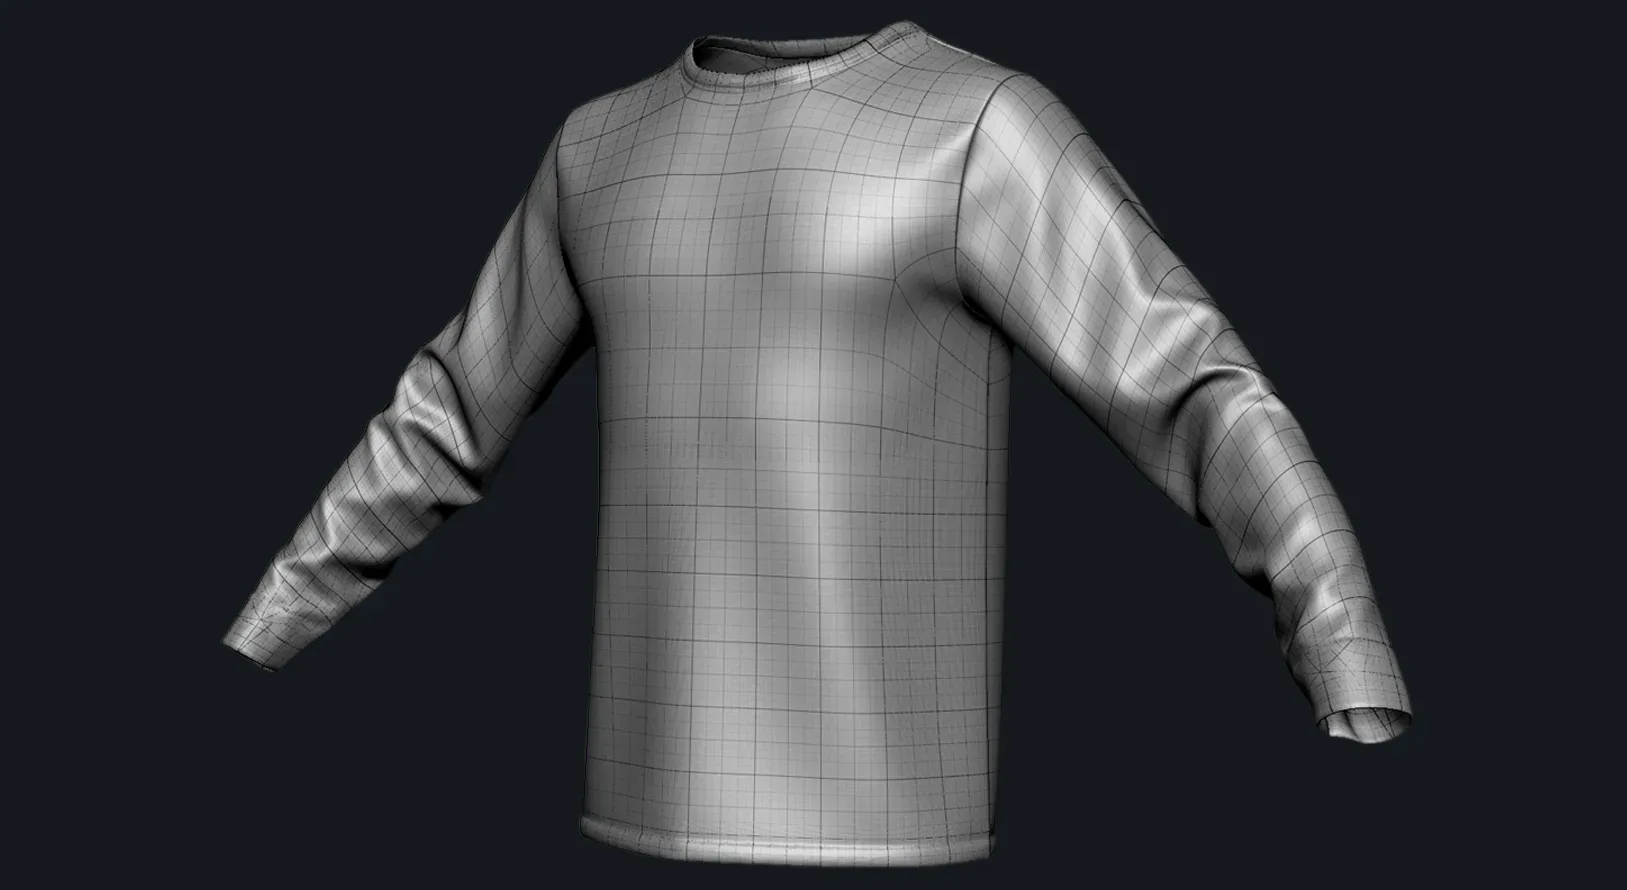 Marvelous Designer Exporting for Production